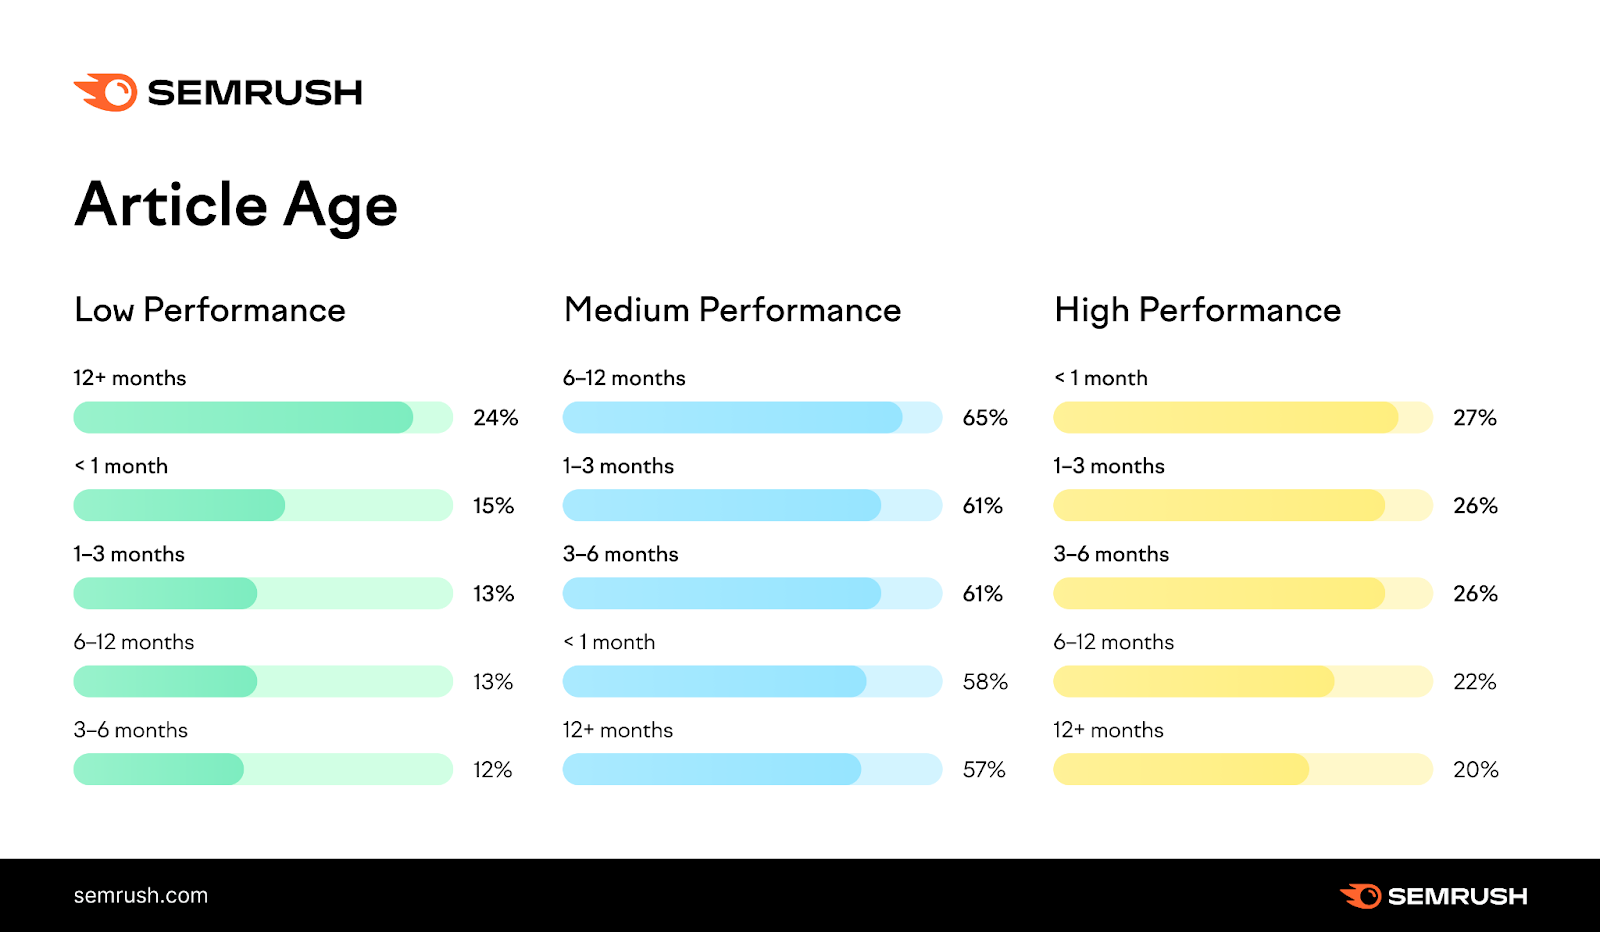 Article age and content performance